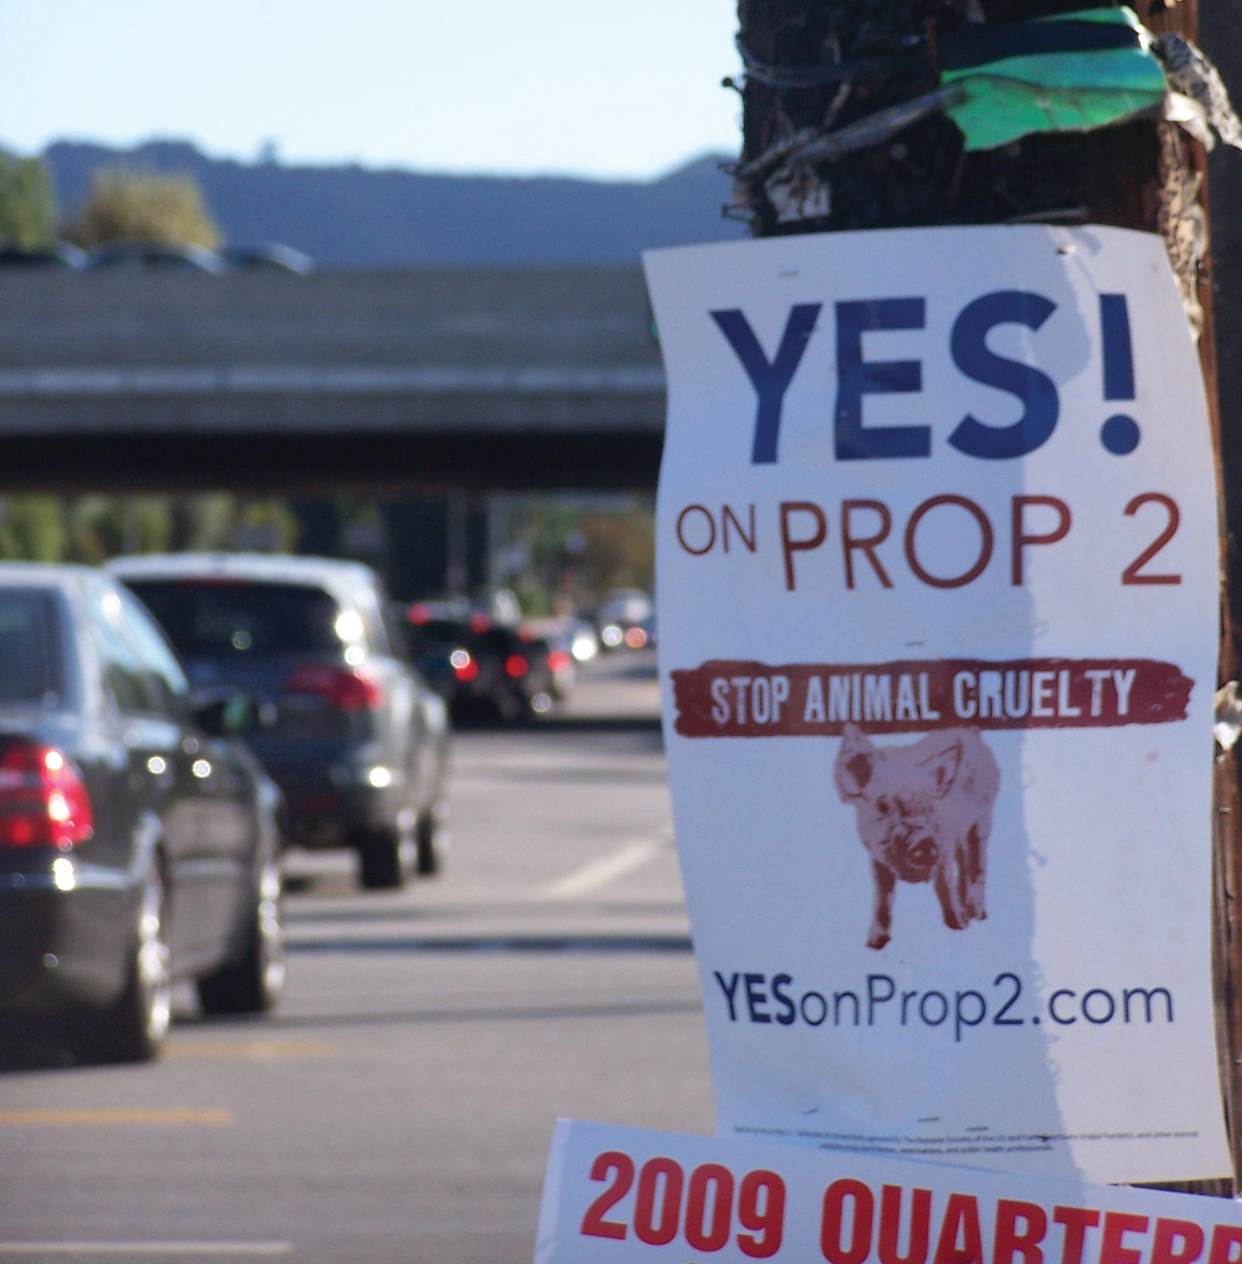 Yes on Prop 2 sign in California.